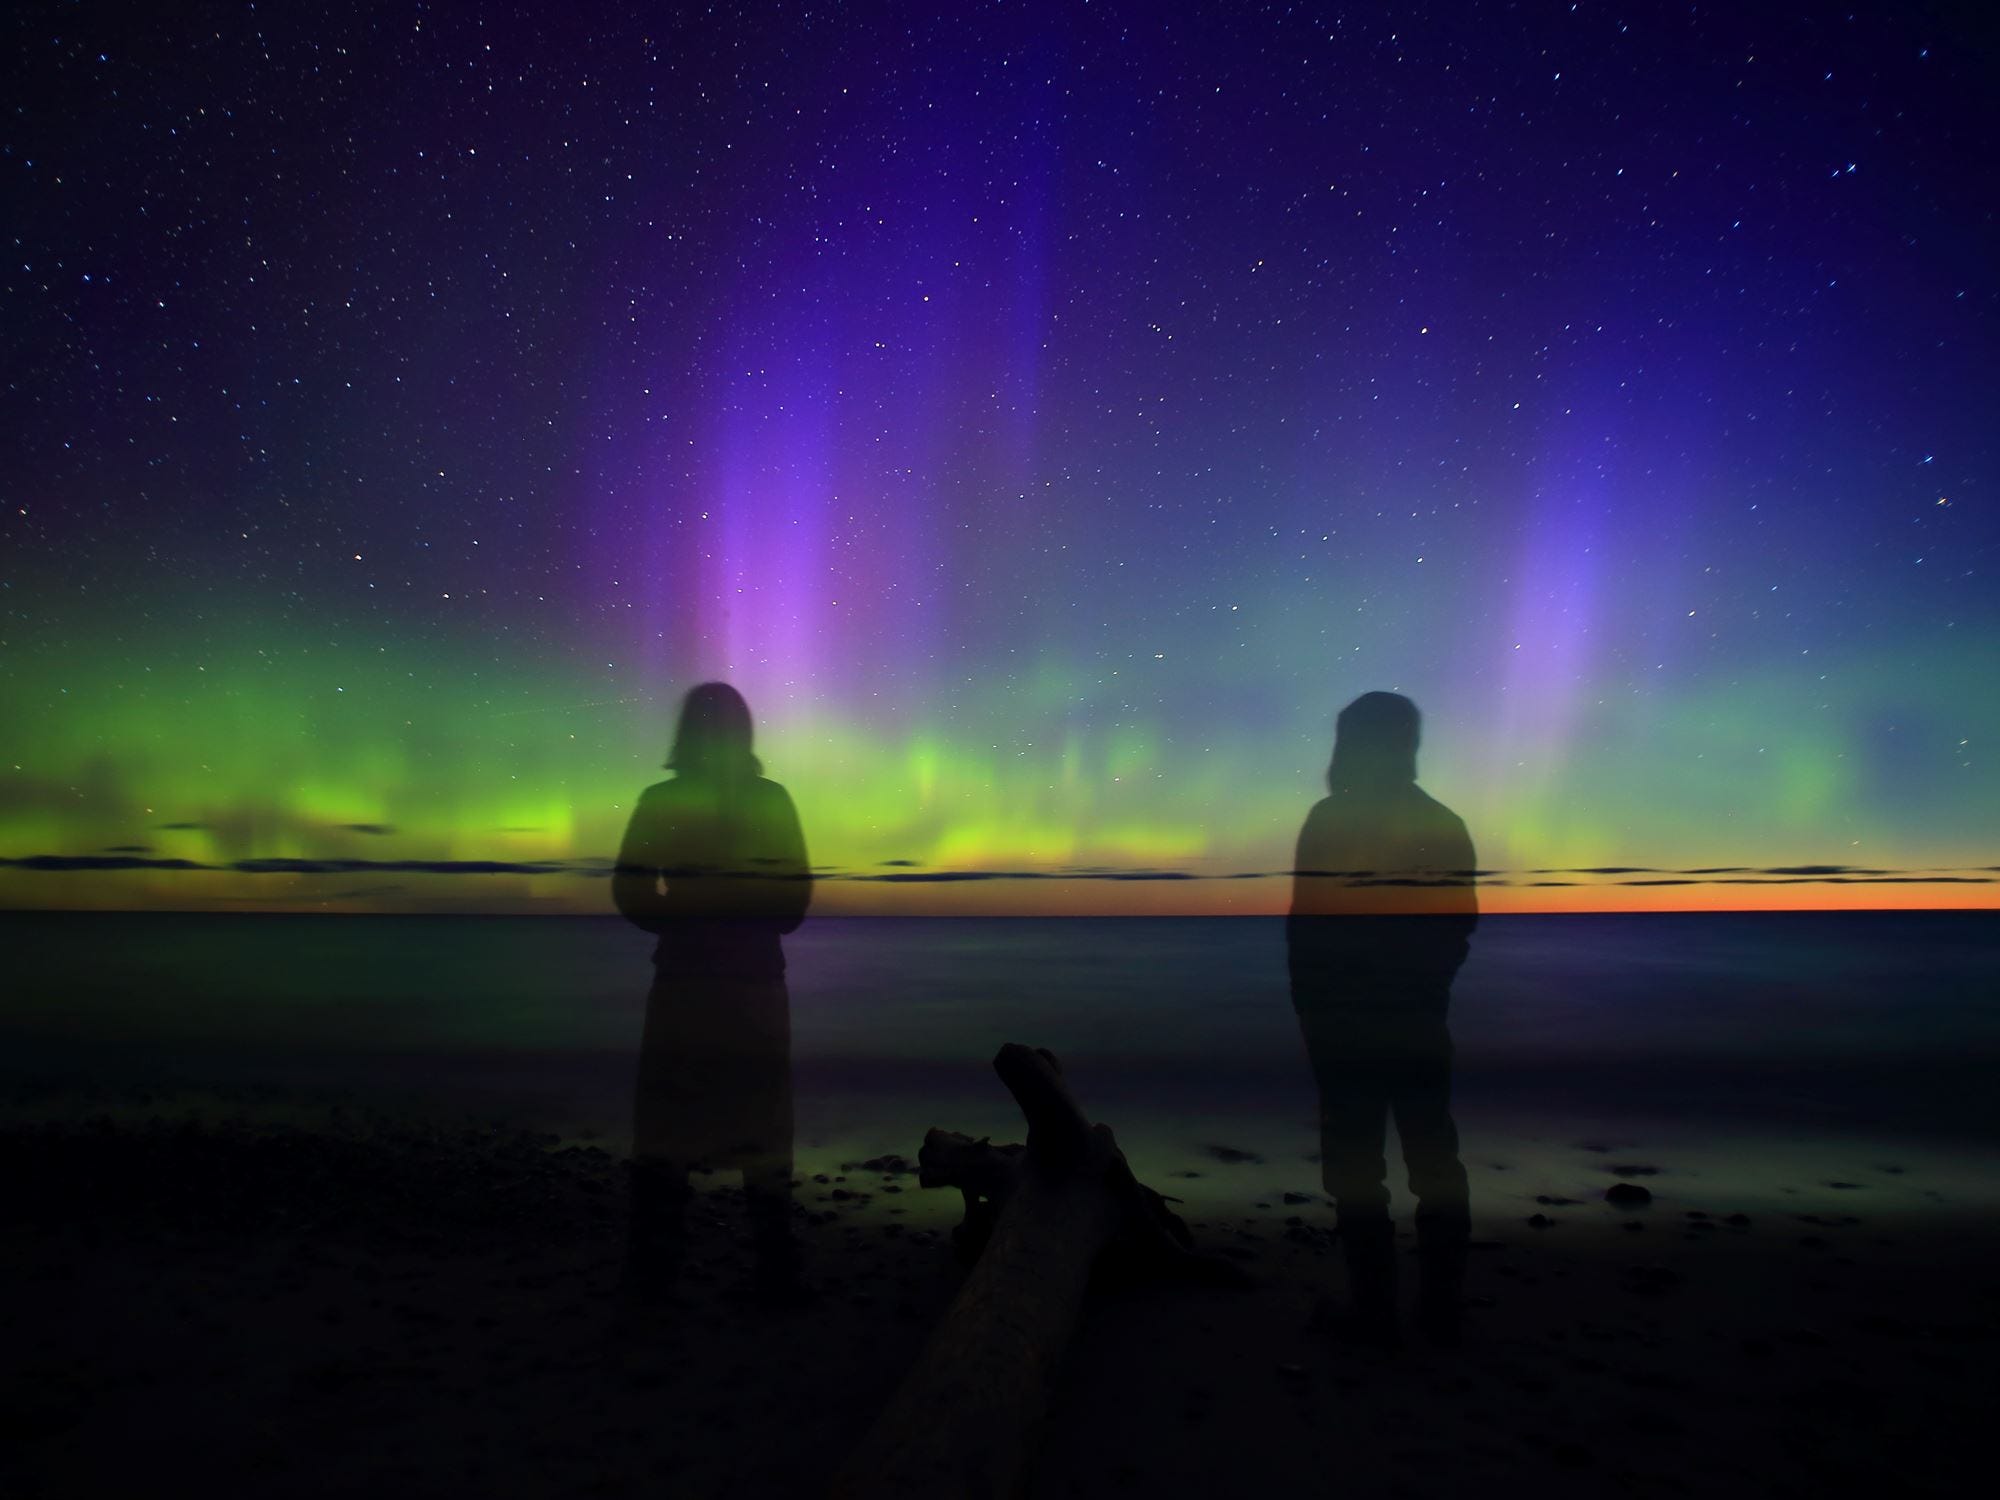 Award of Excellence winner in Candid Captures: "Northern lights in Lake Superior," by Takuma Saito, of Novi